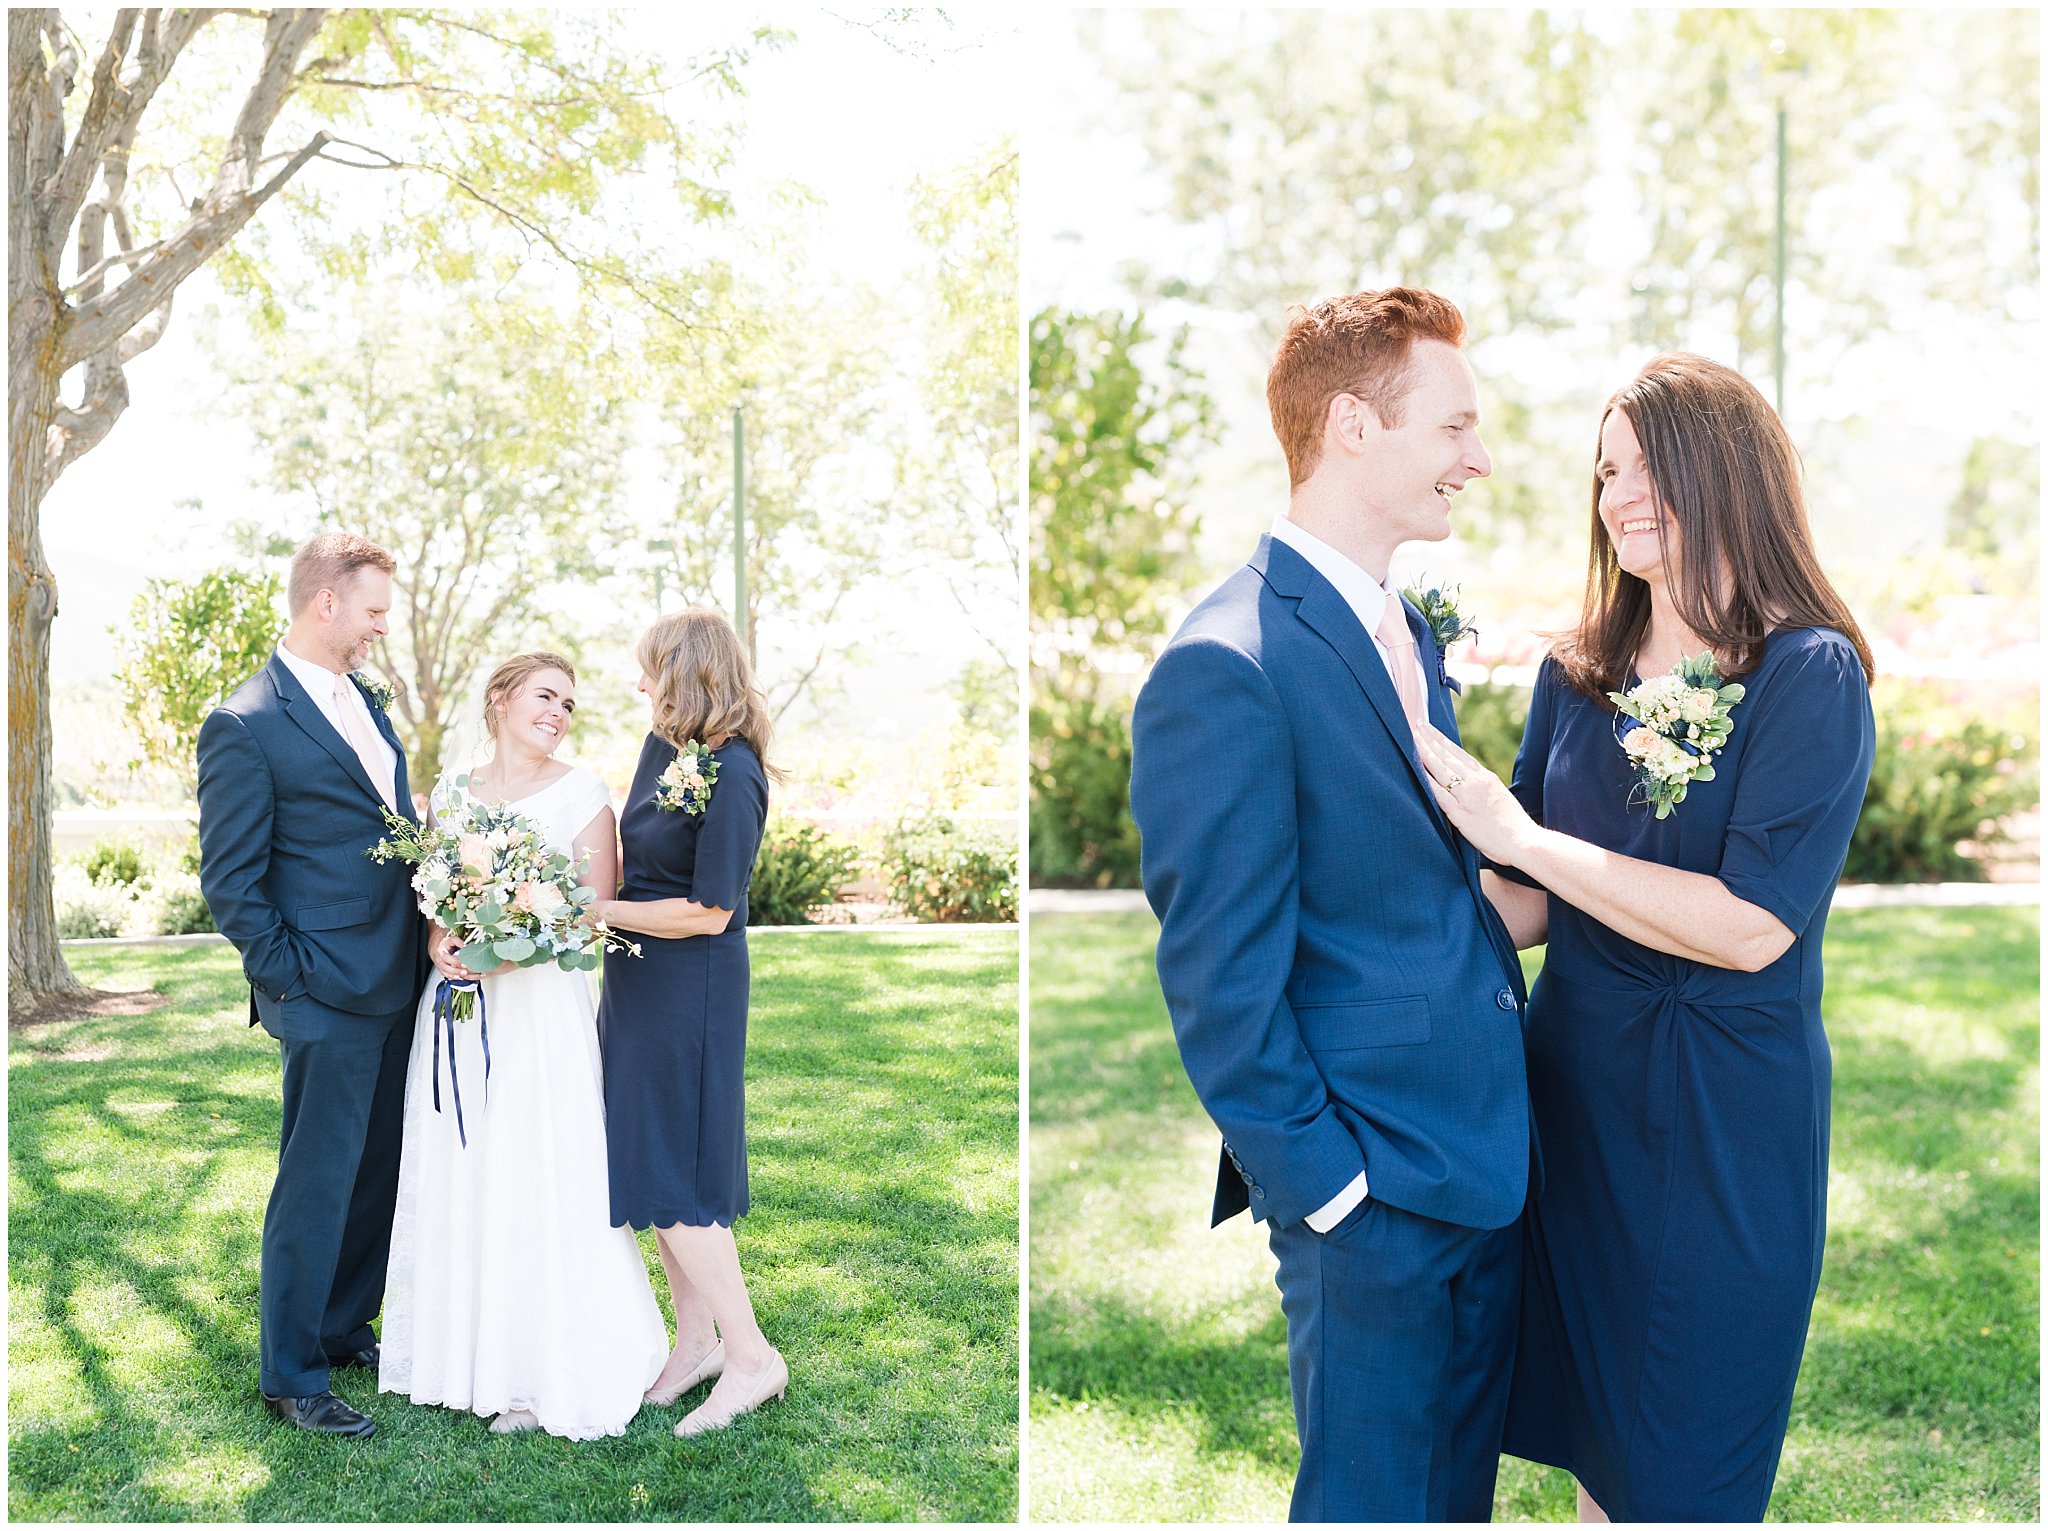 Family portraits at the temple | Bountiful Temple Wedding and Oak Hills Reception | Jessie and Dallin Photography